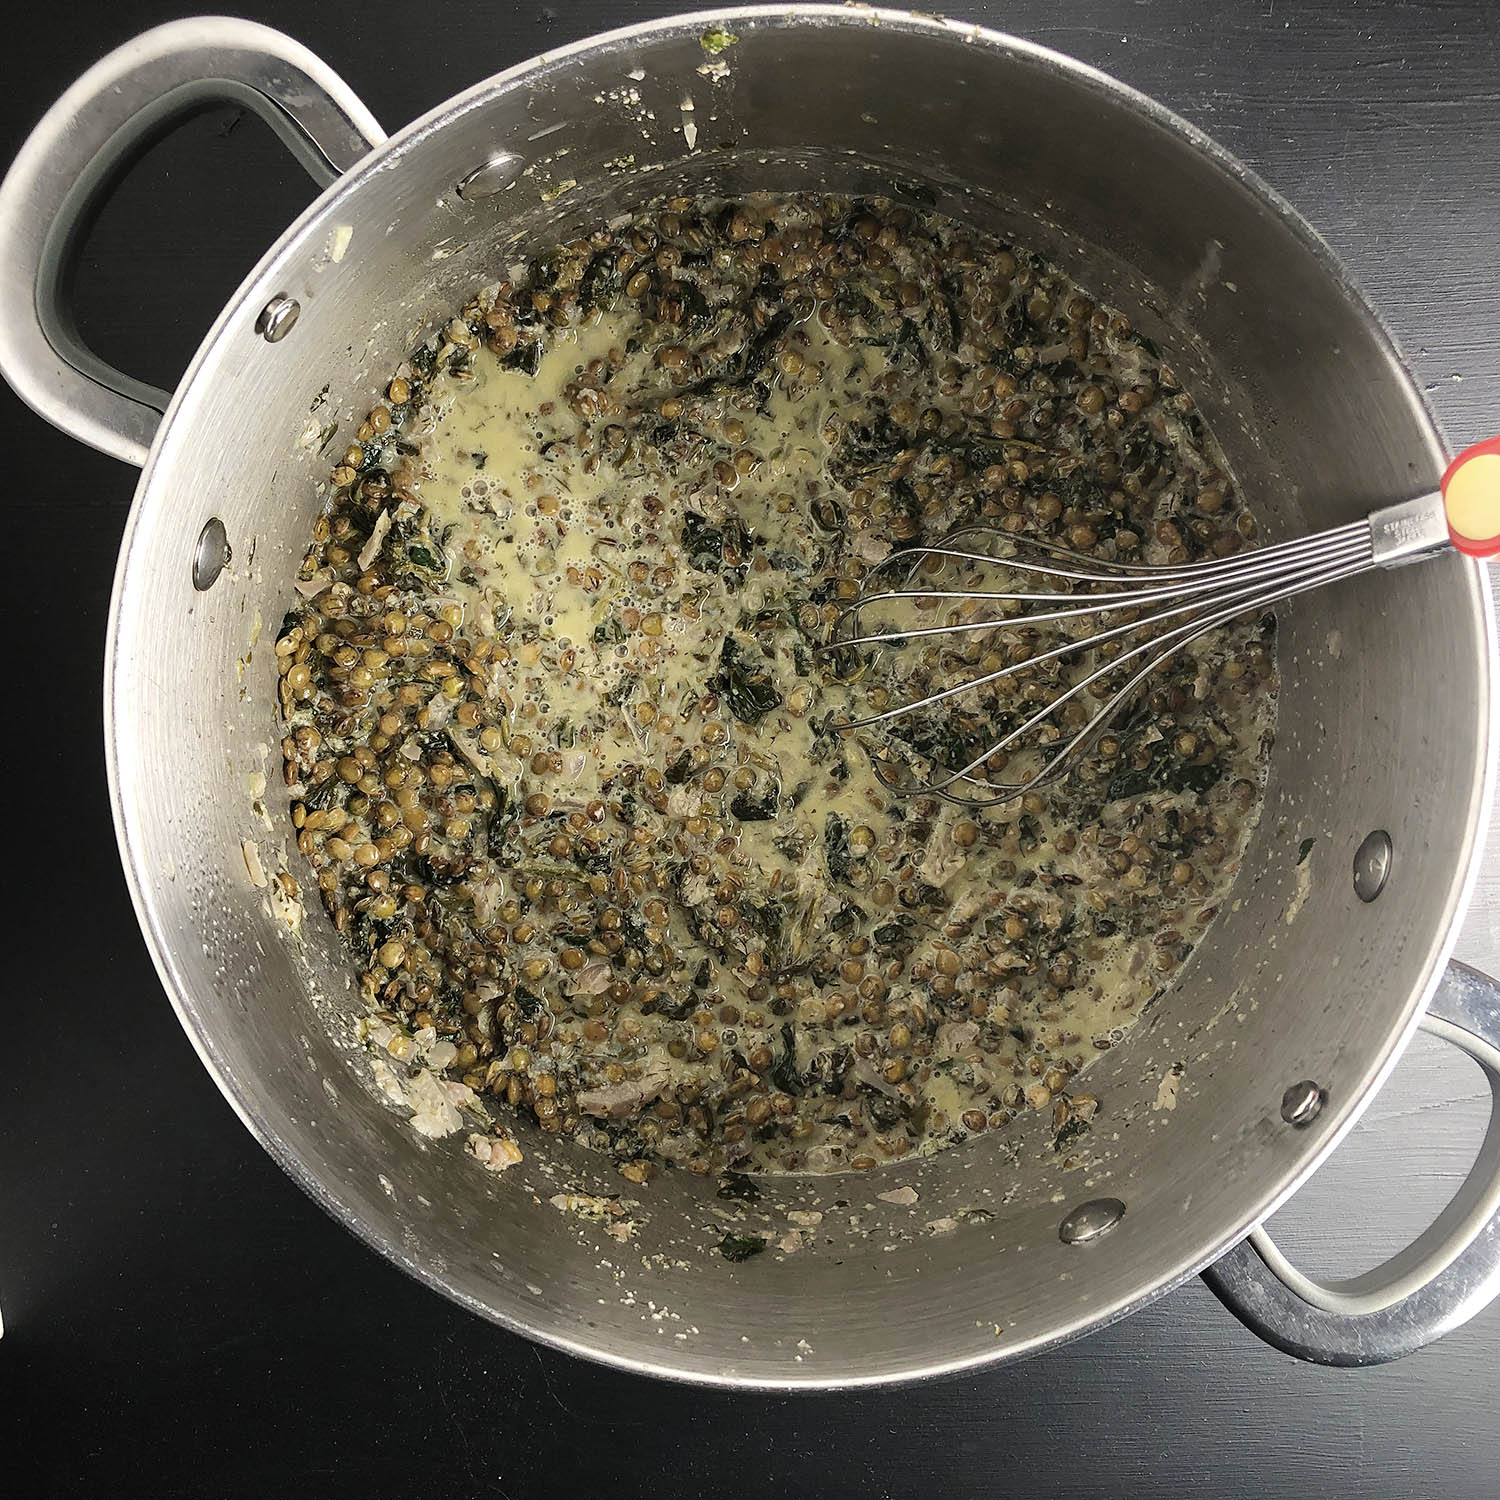 Making Lentil, Lemon, and Dill Soup. Whisk in egg mixture and heat through.